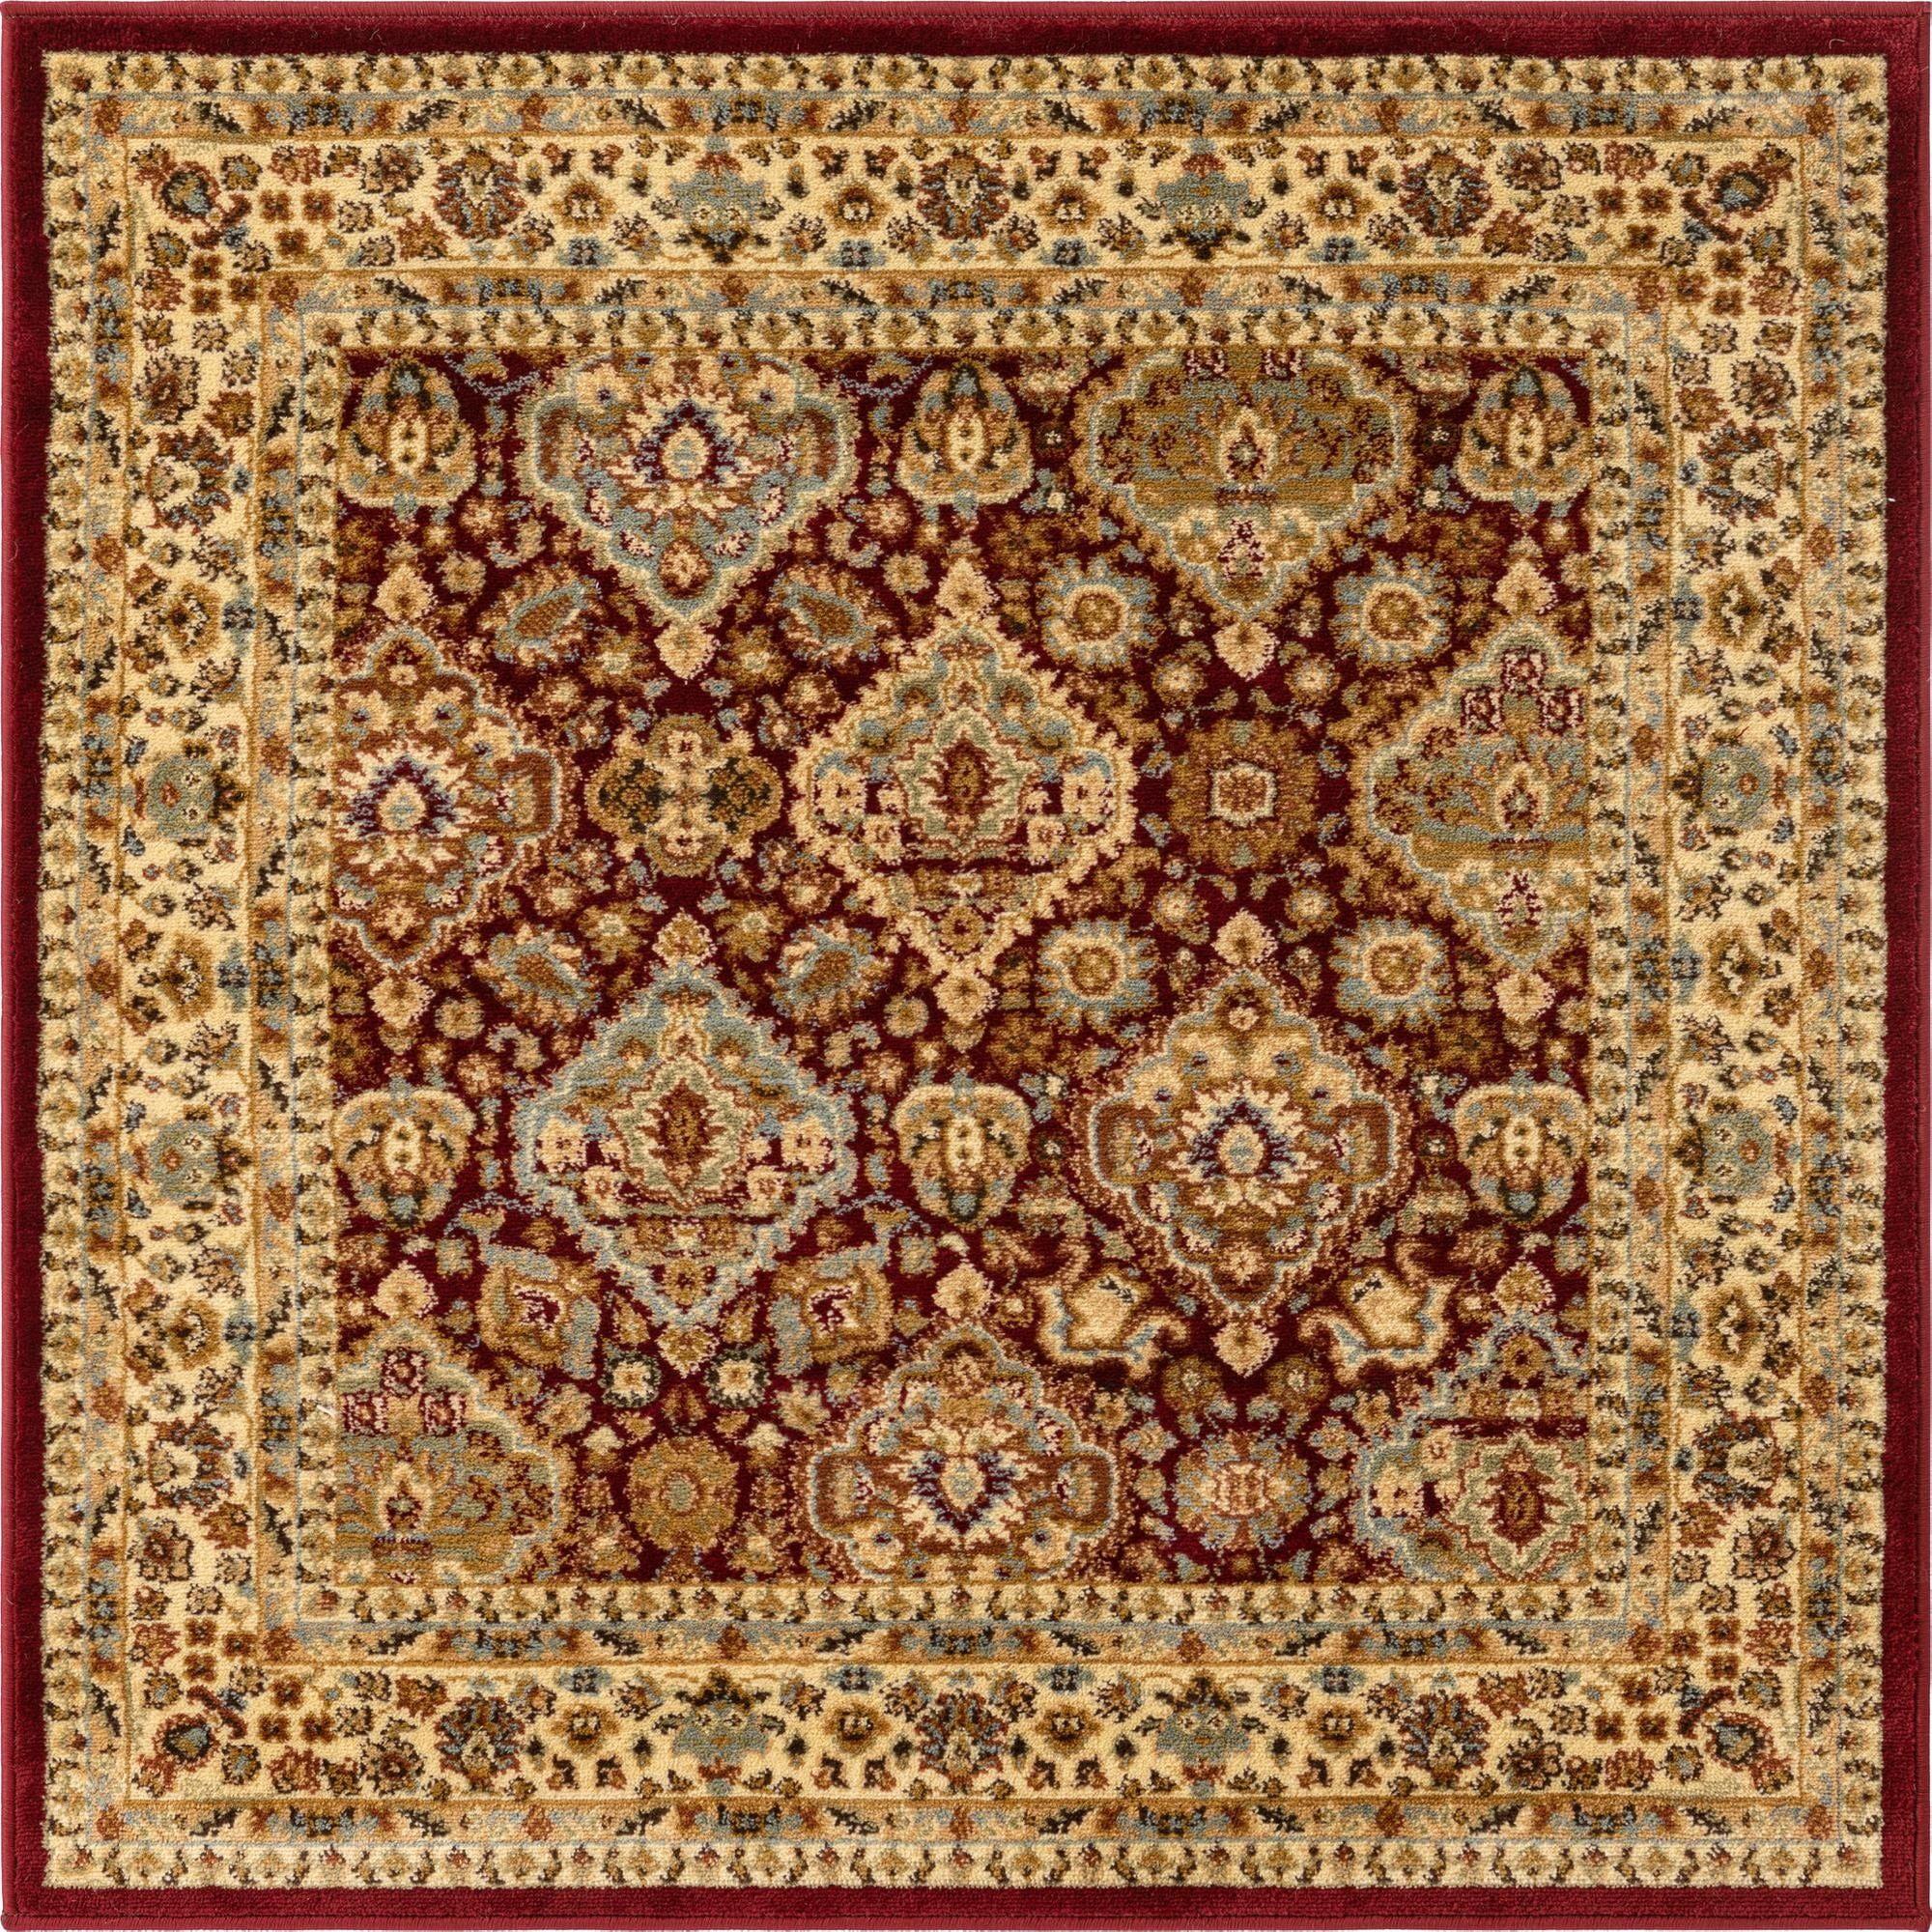 Elegant Red Square Floral Indoor Rug 4' x 4' - Stain-Resistant Synthetic